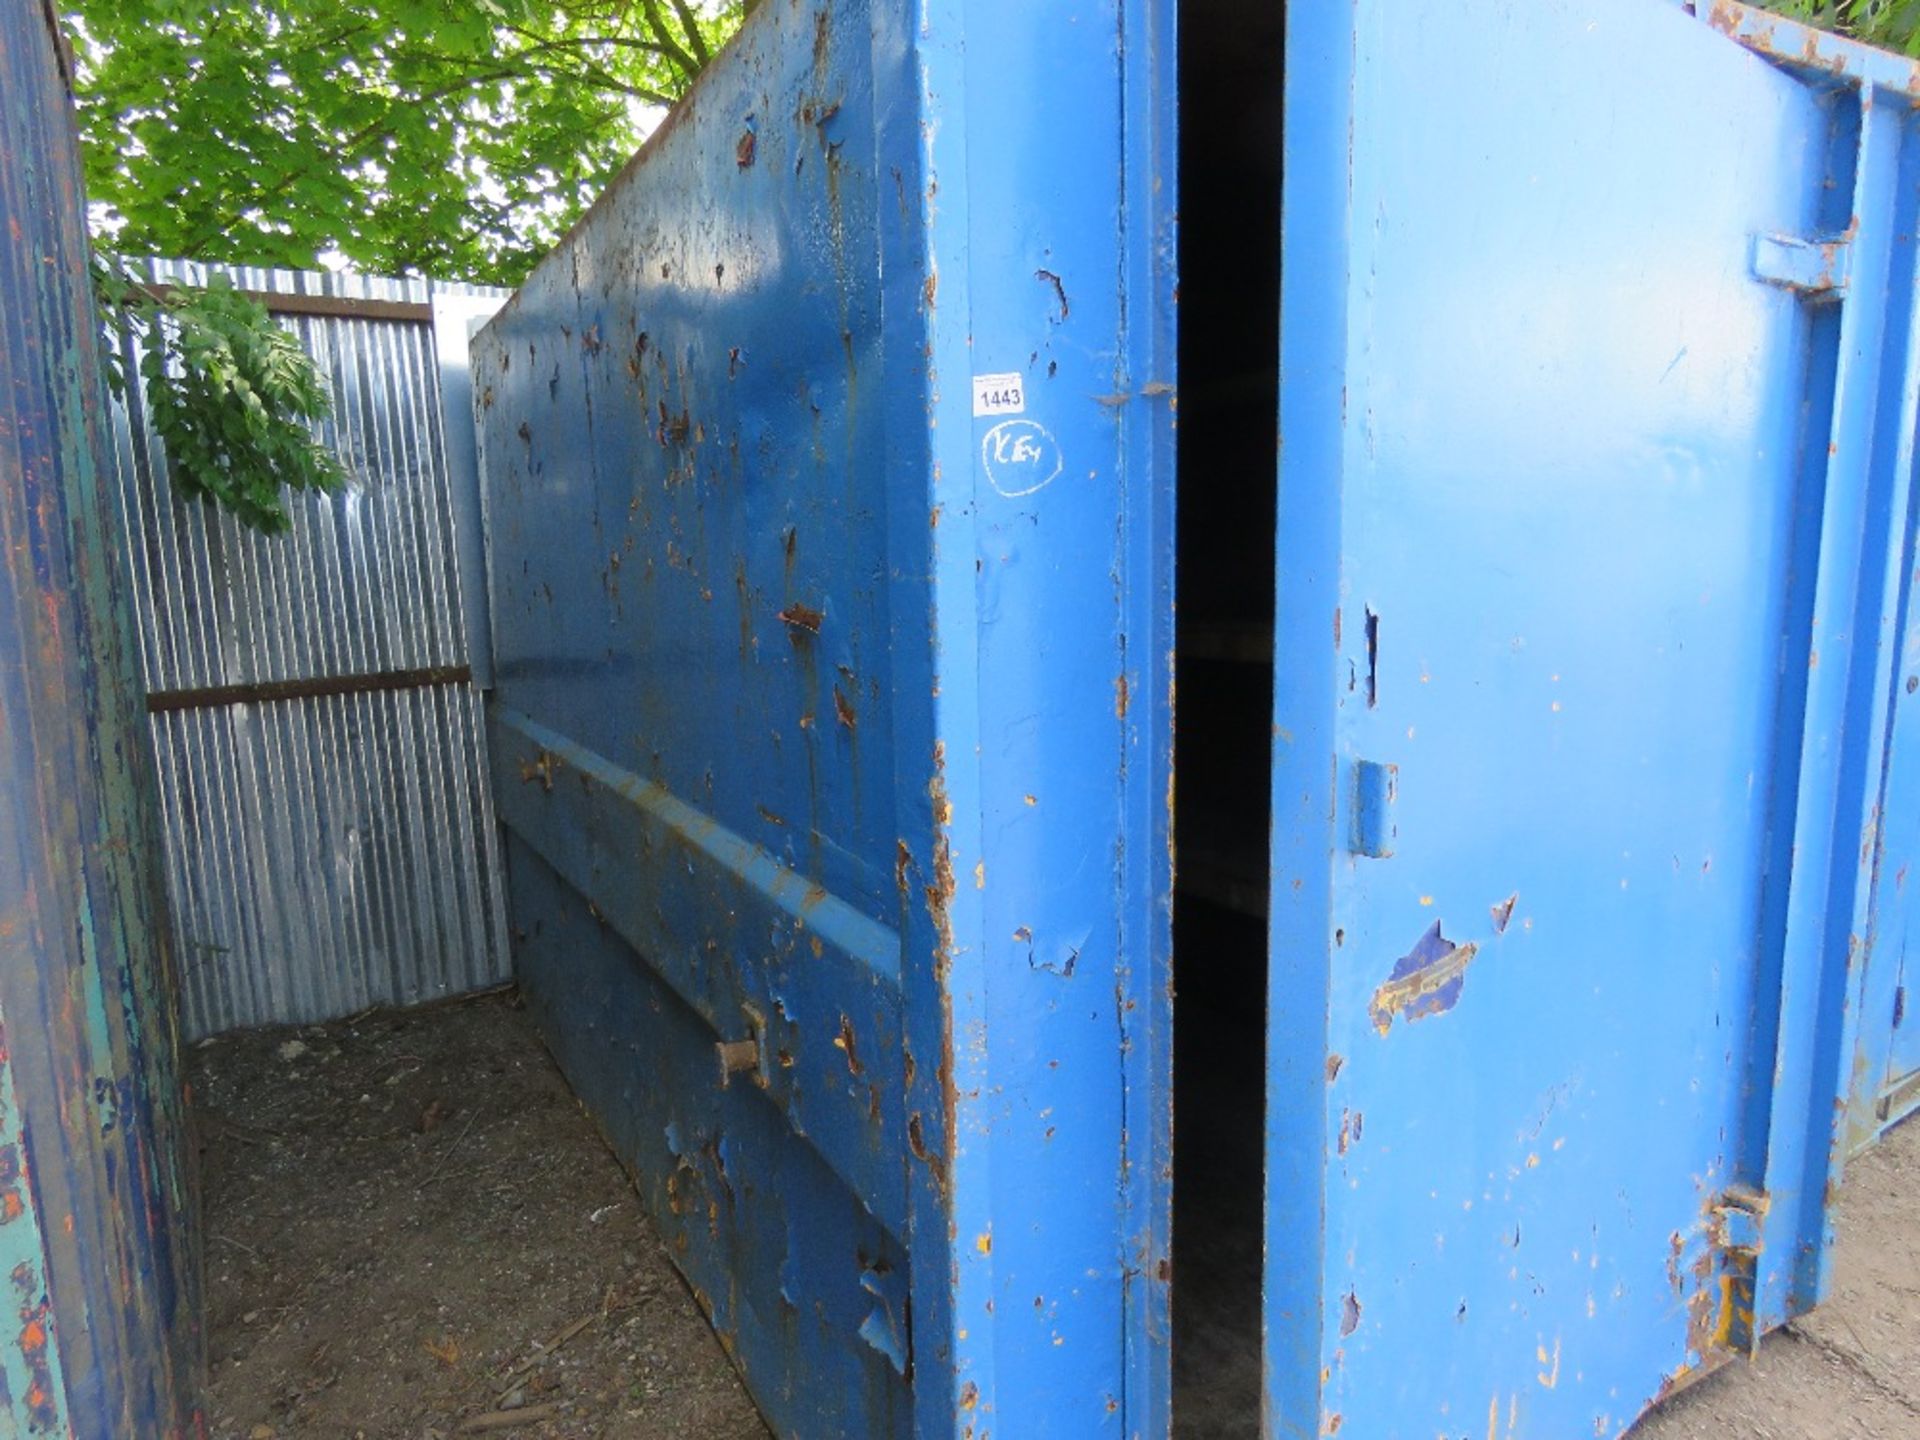 CHAIN LIFT SKIP TYPE ENCLOSED STORAGE CONTAINER 6FT WIDE X 10FT LENGTH APPROX WITH KEY. TS13. - Image 2 of 5